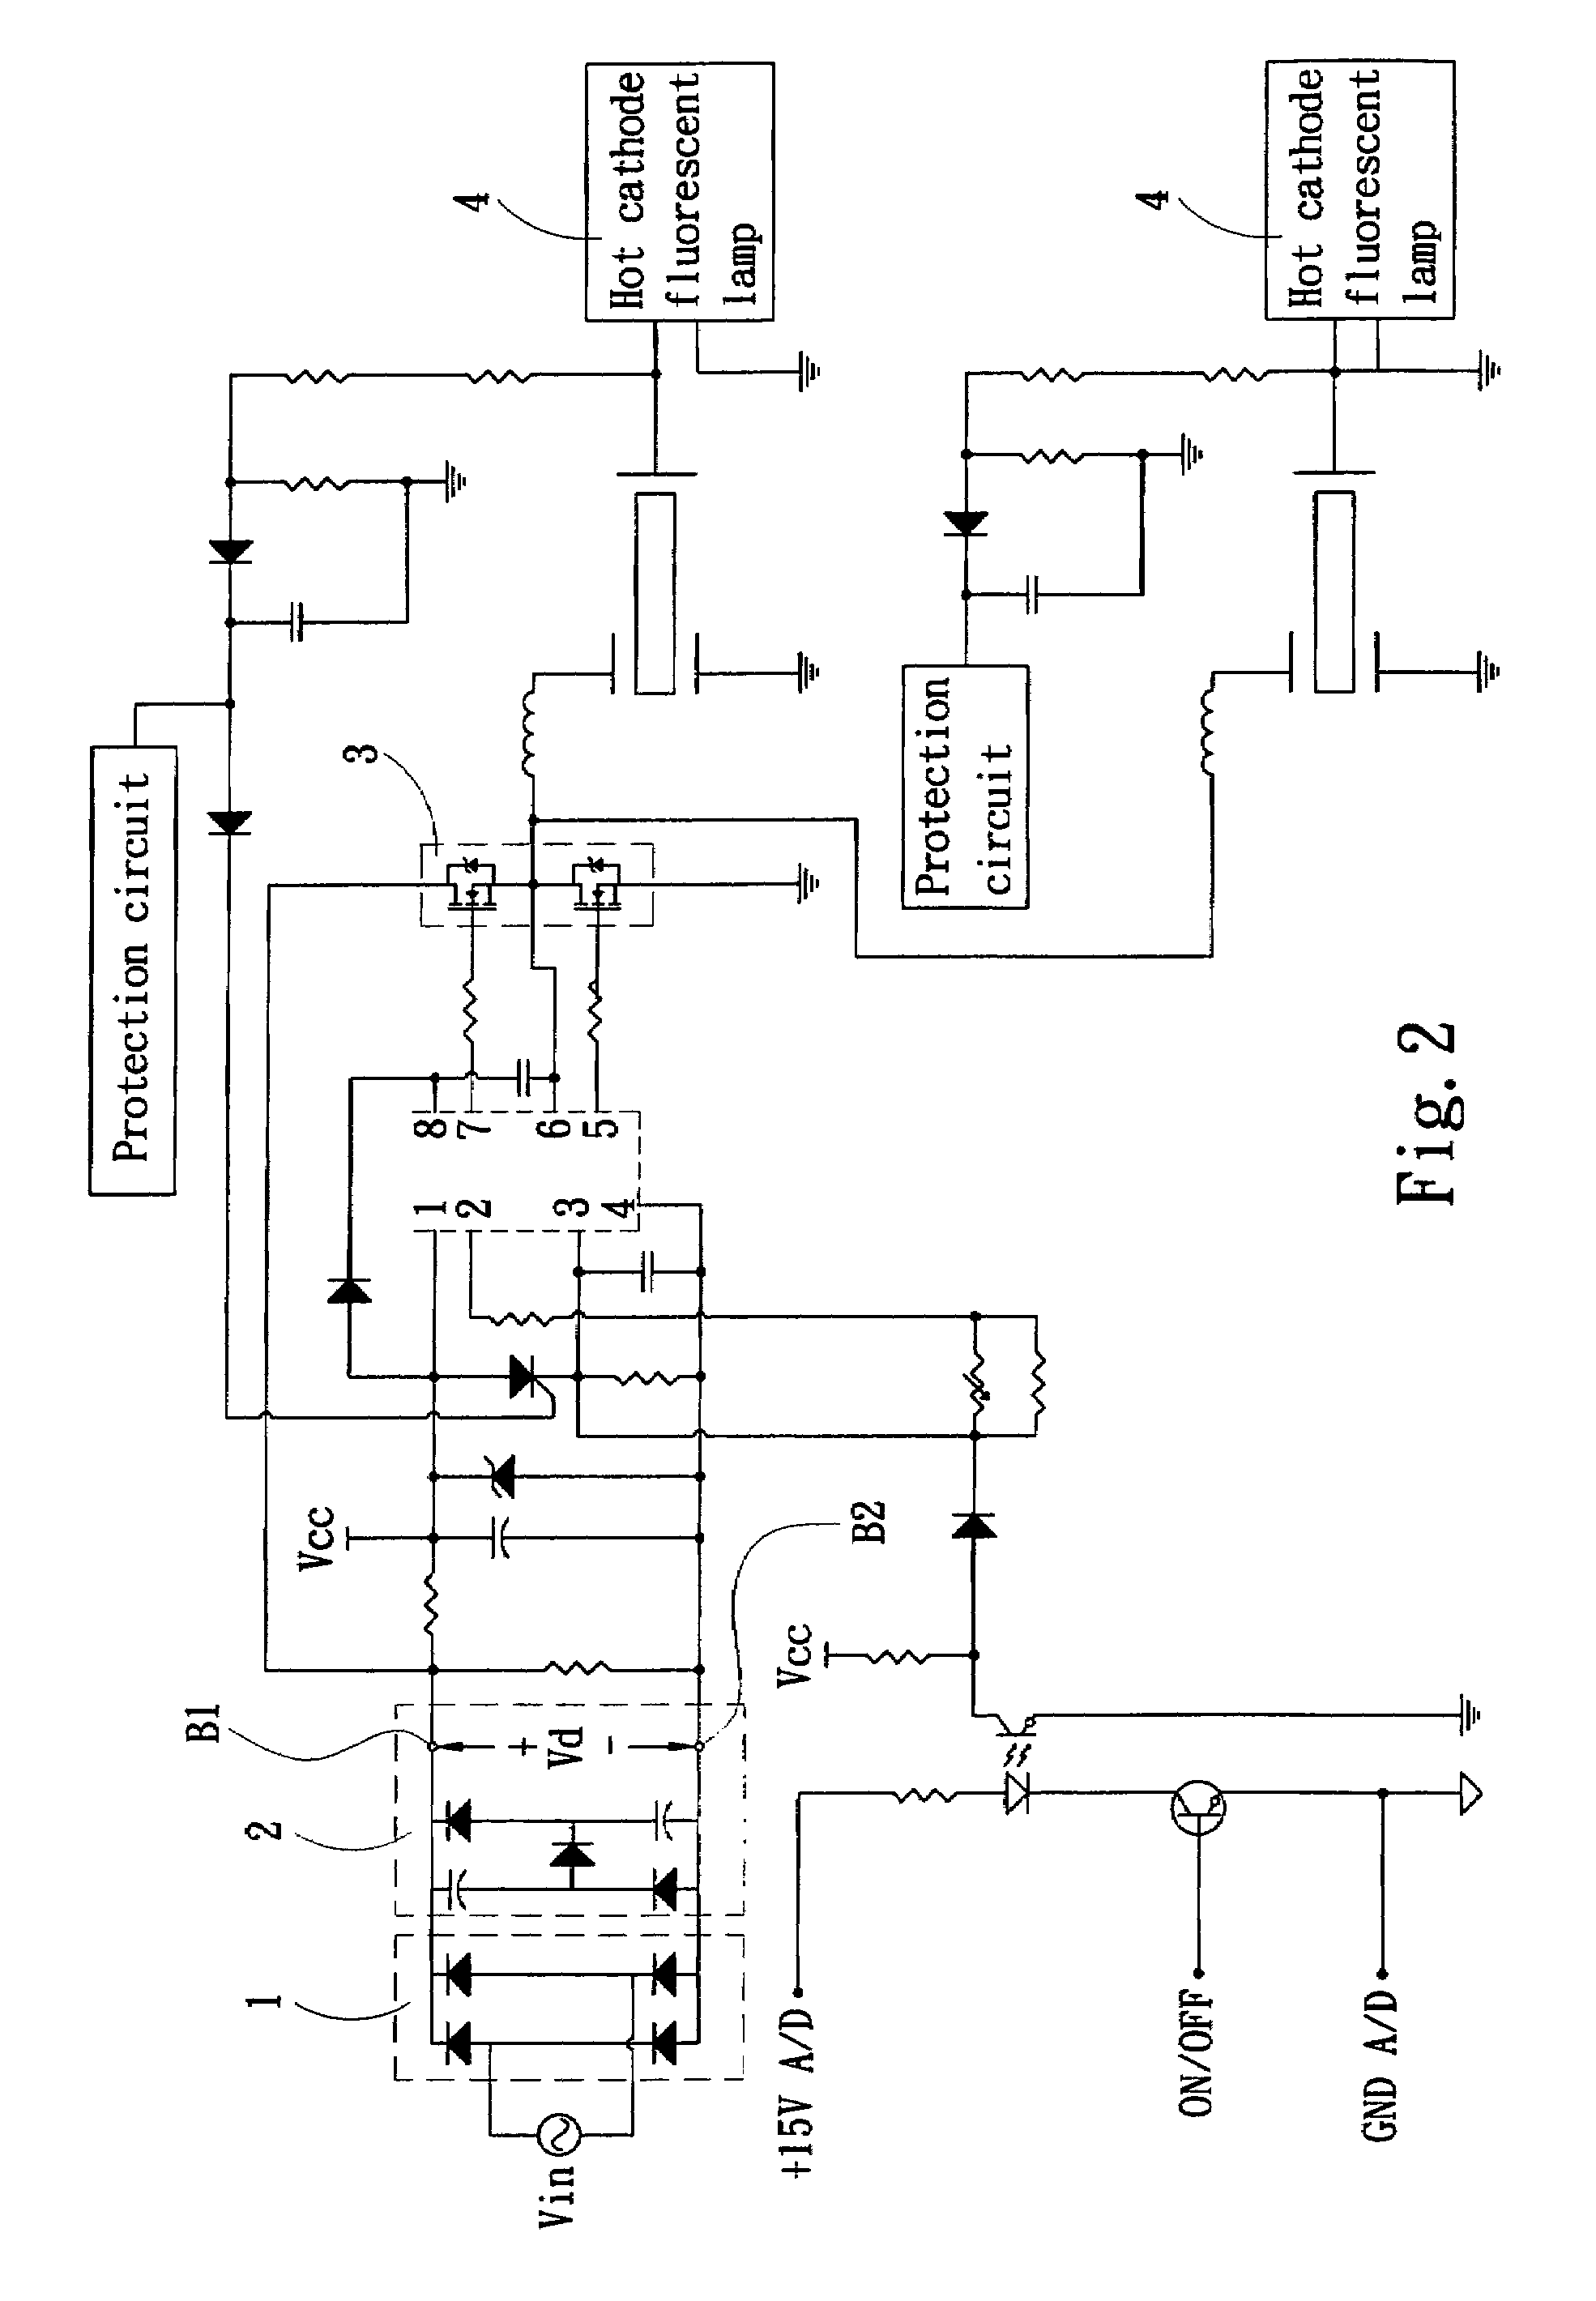 Driving circuit for hot cathode fluorescent lamps